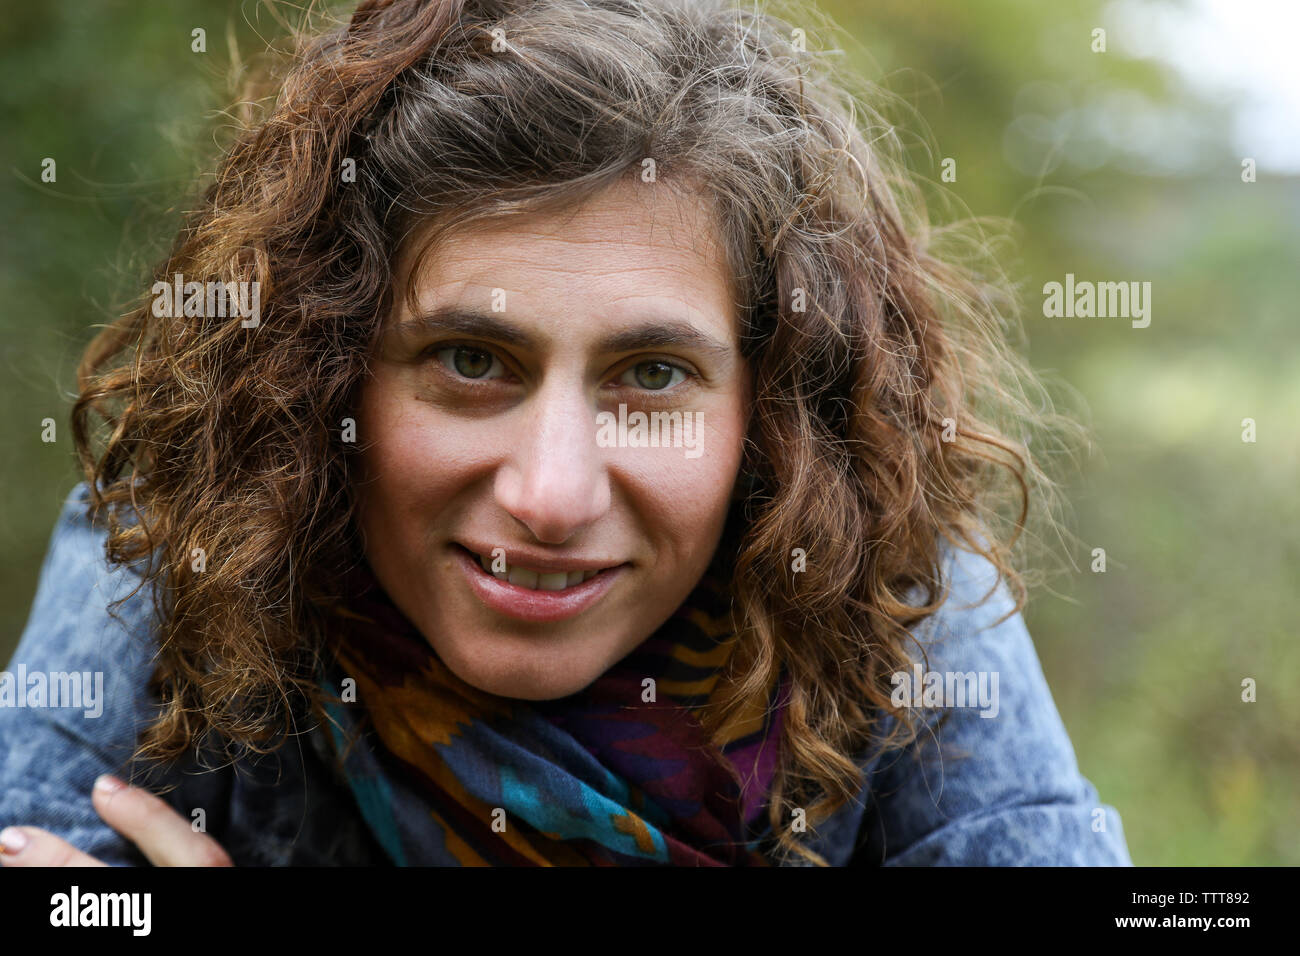 Close up of woman with curly brown hair wearing scarf Banque D'Images